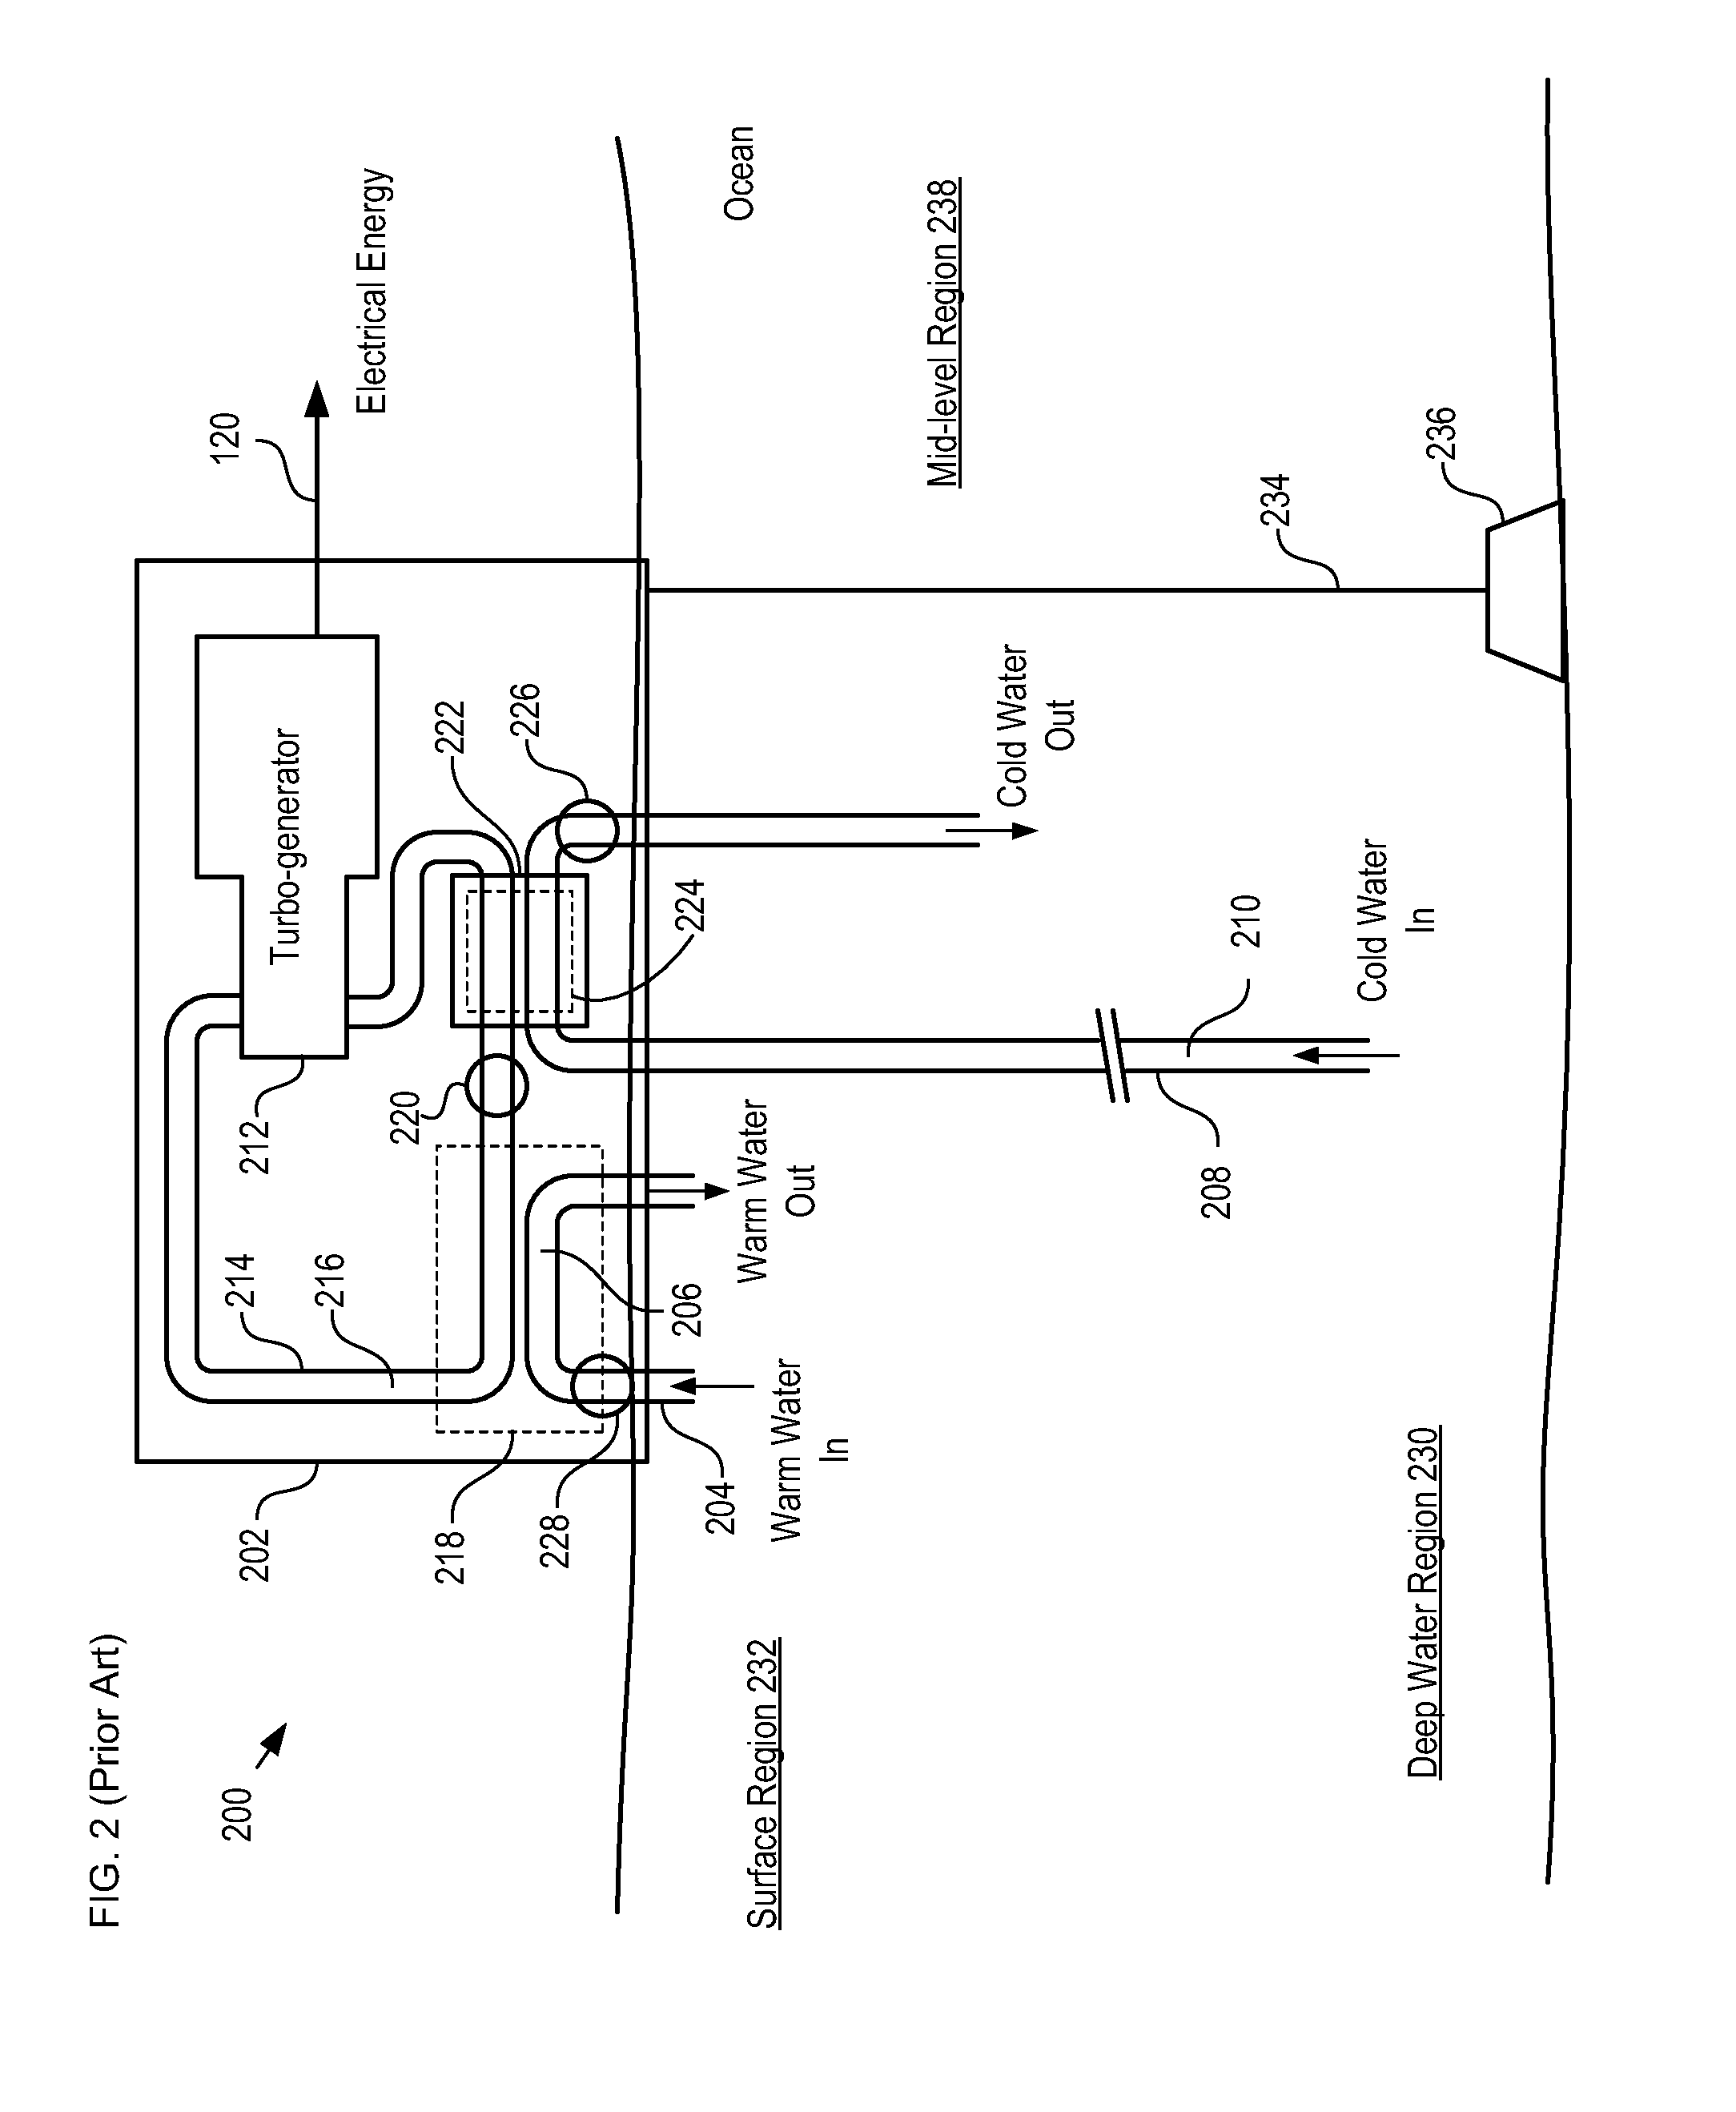 Petroleum-based Thermoelectric Energy Conversion System